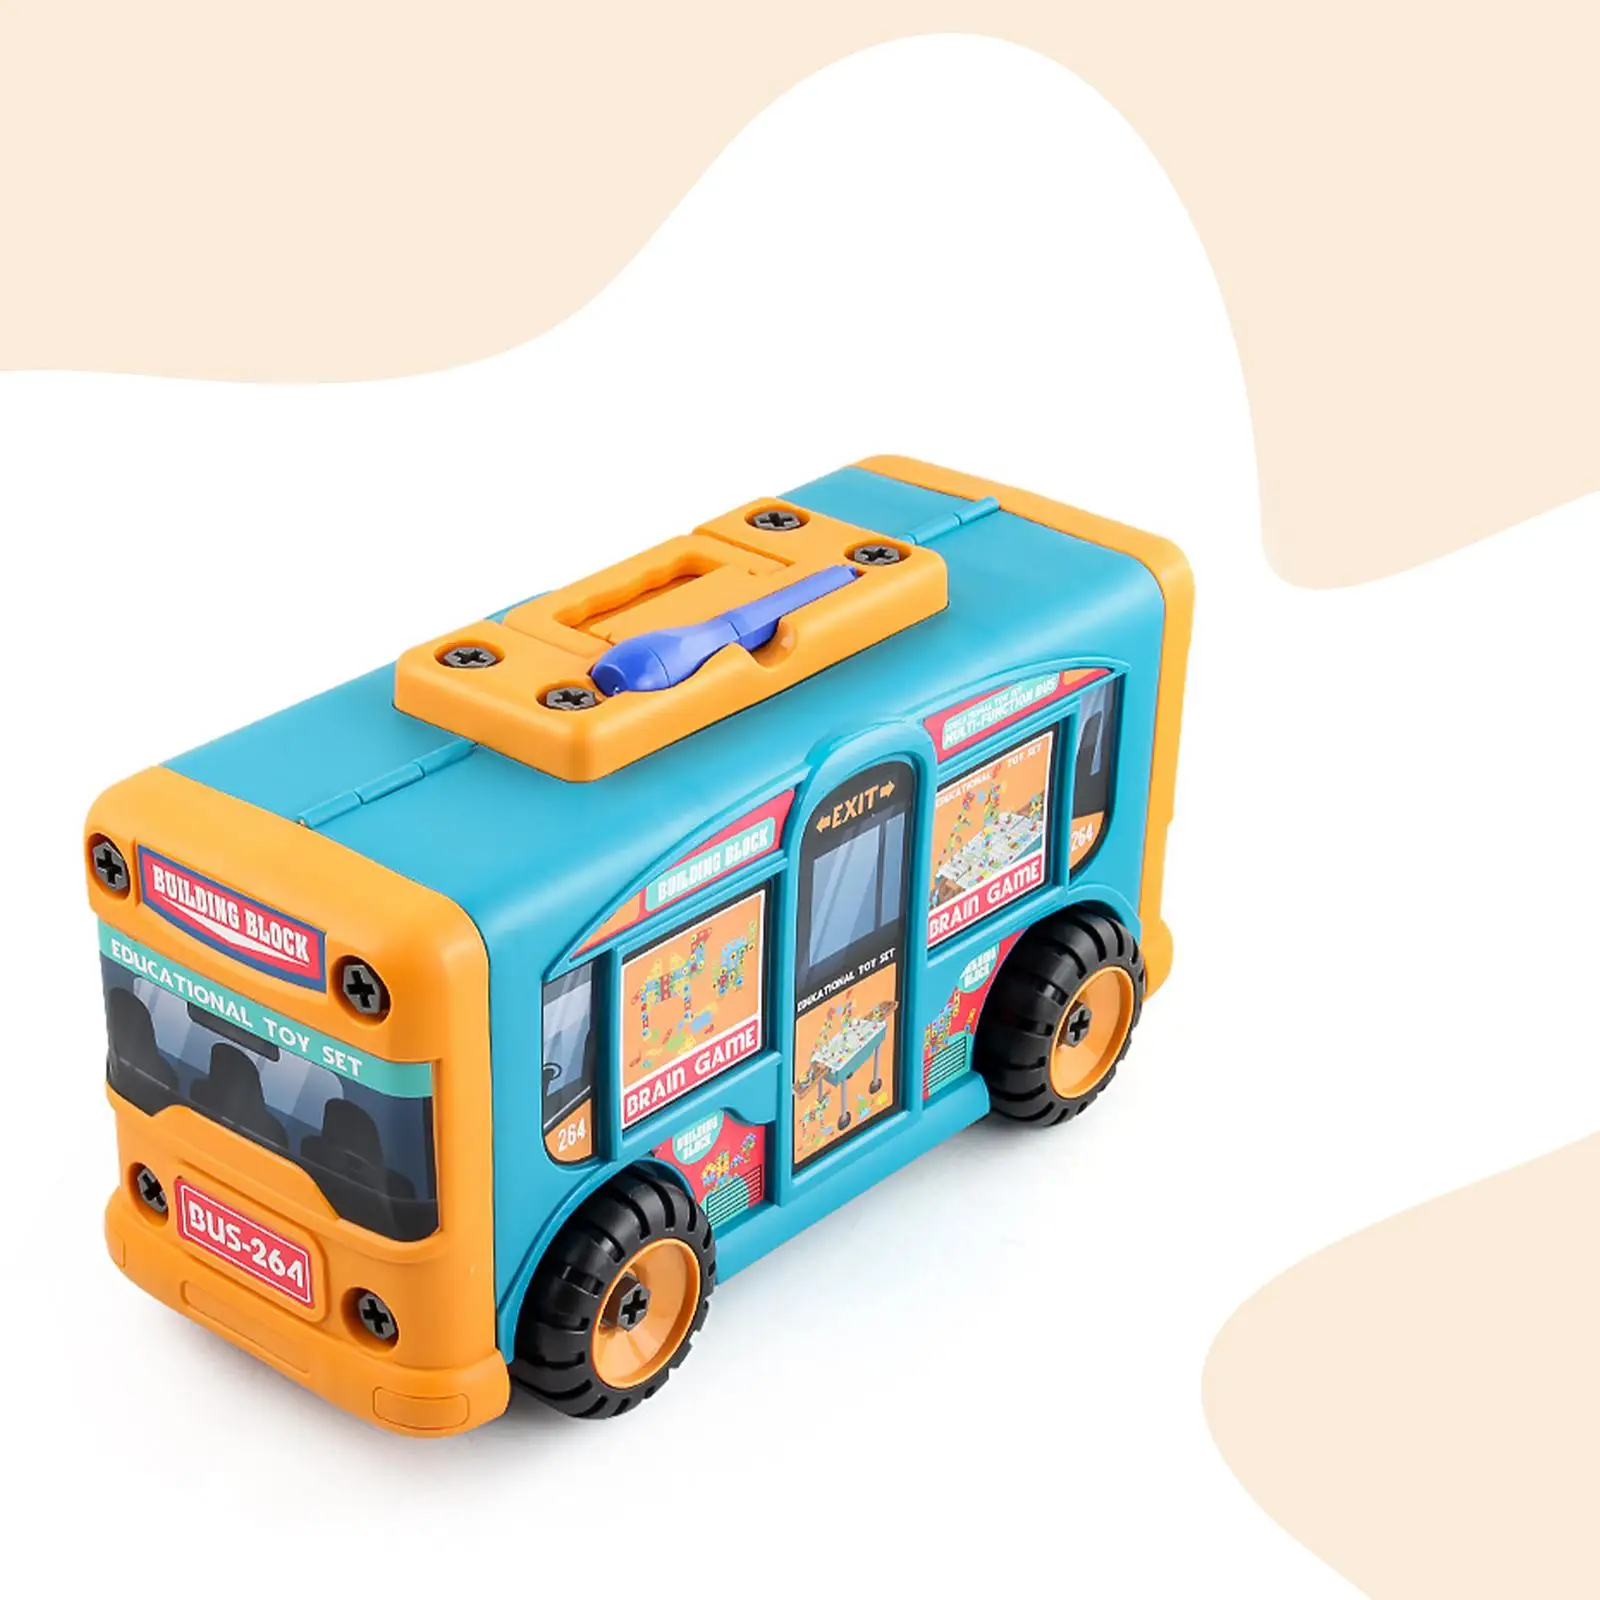   Deformed Bus Toy Assembled Pieces Variable Shape for Children  